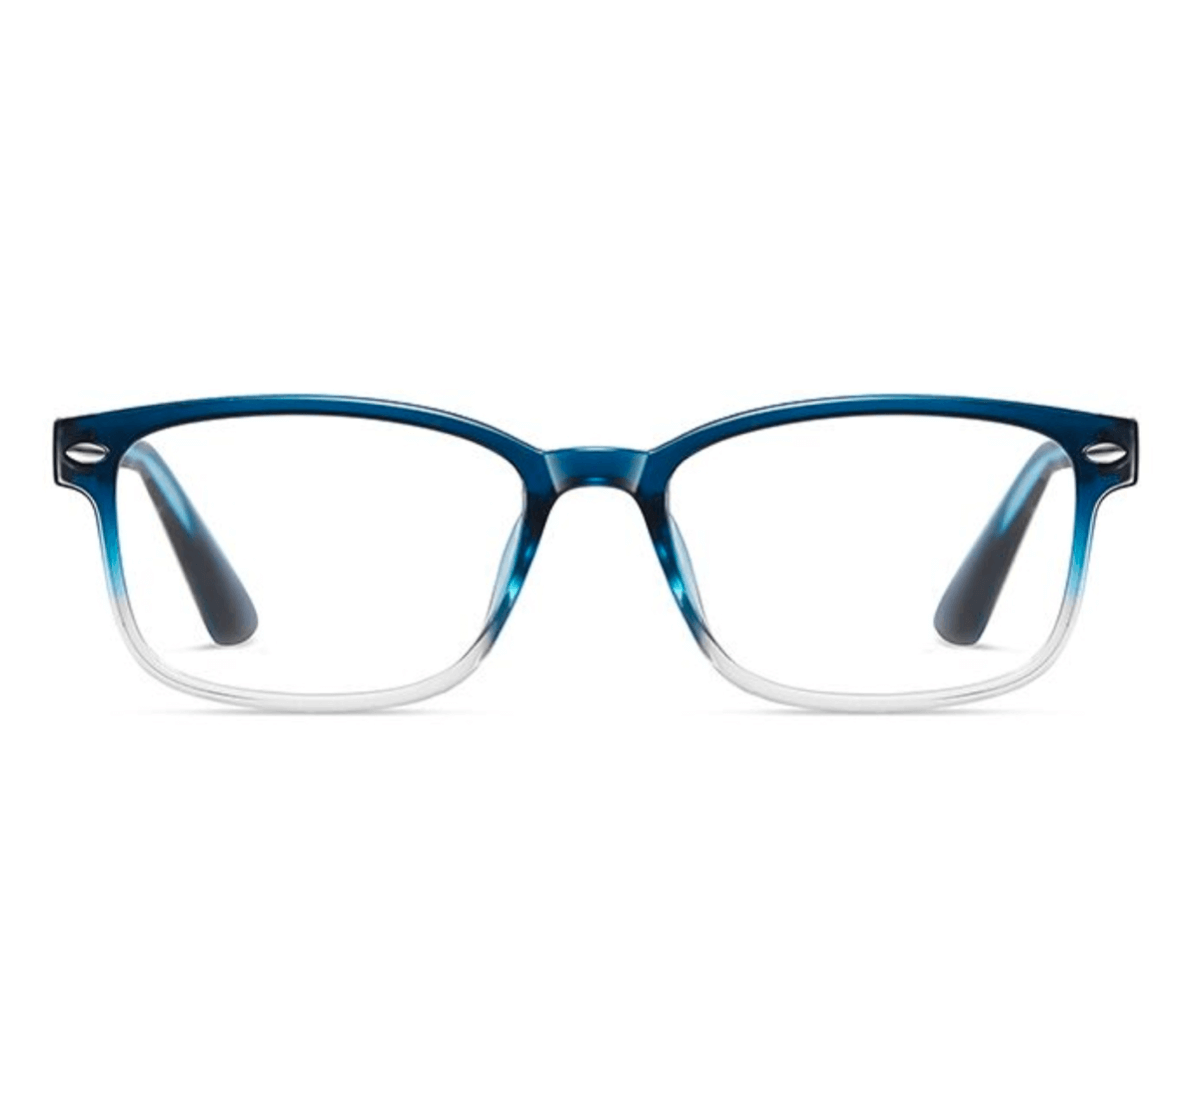 blue light blocking glasses wholesale, China reading glasses manufacturer, reading glasses wholesale suppliers, wholesale cheap reading glasses, reading glasses made in China